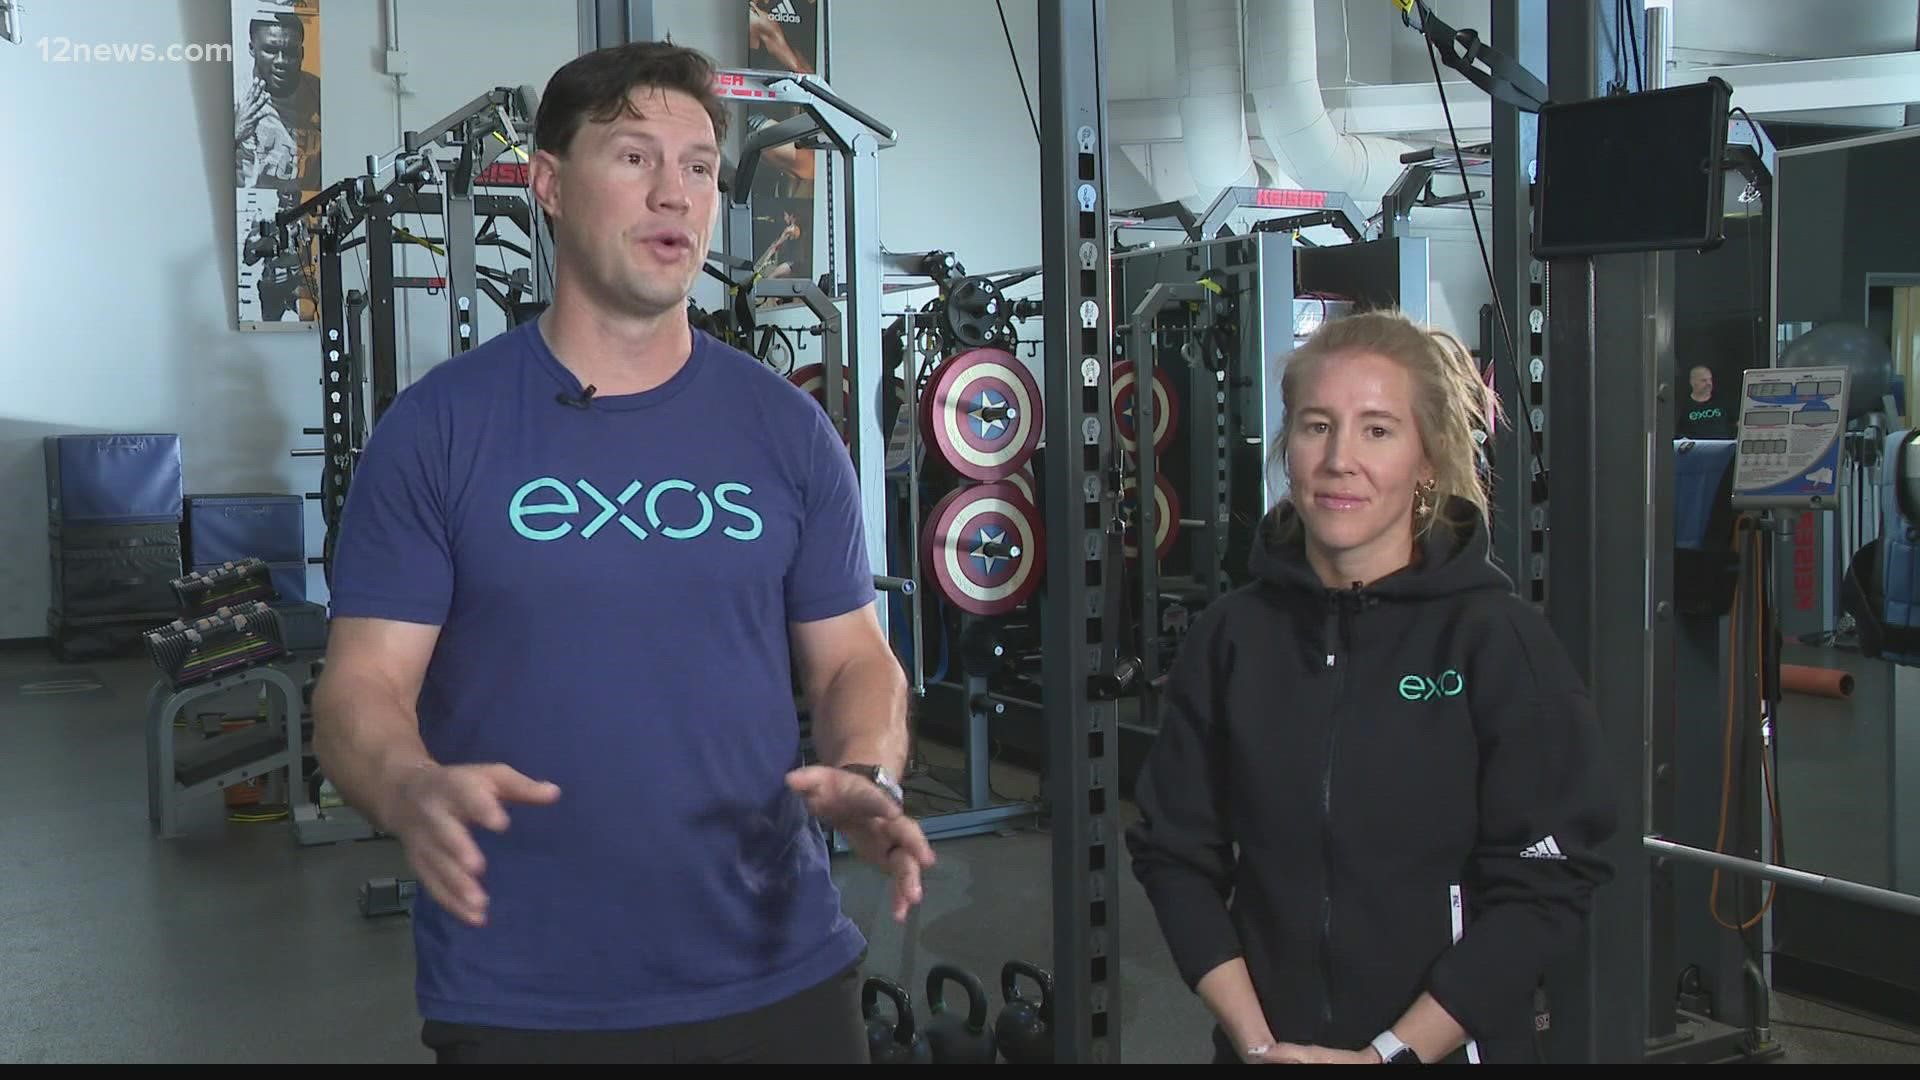 Now retired from hockey, Shane Doan is serving as Team Canada’s Olympic GM in Beijing. He also trained at Exos in Phoenix.